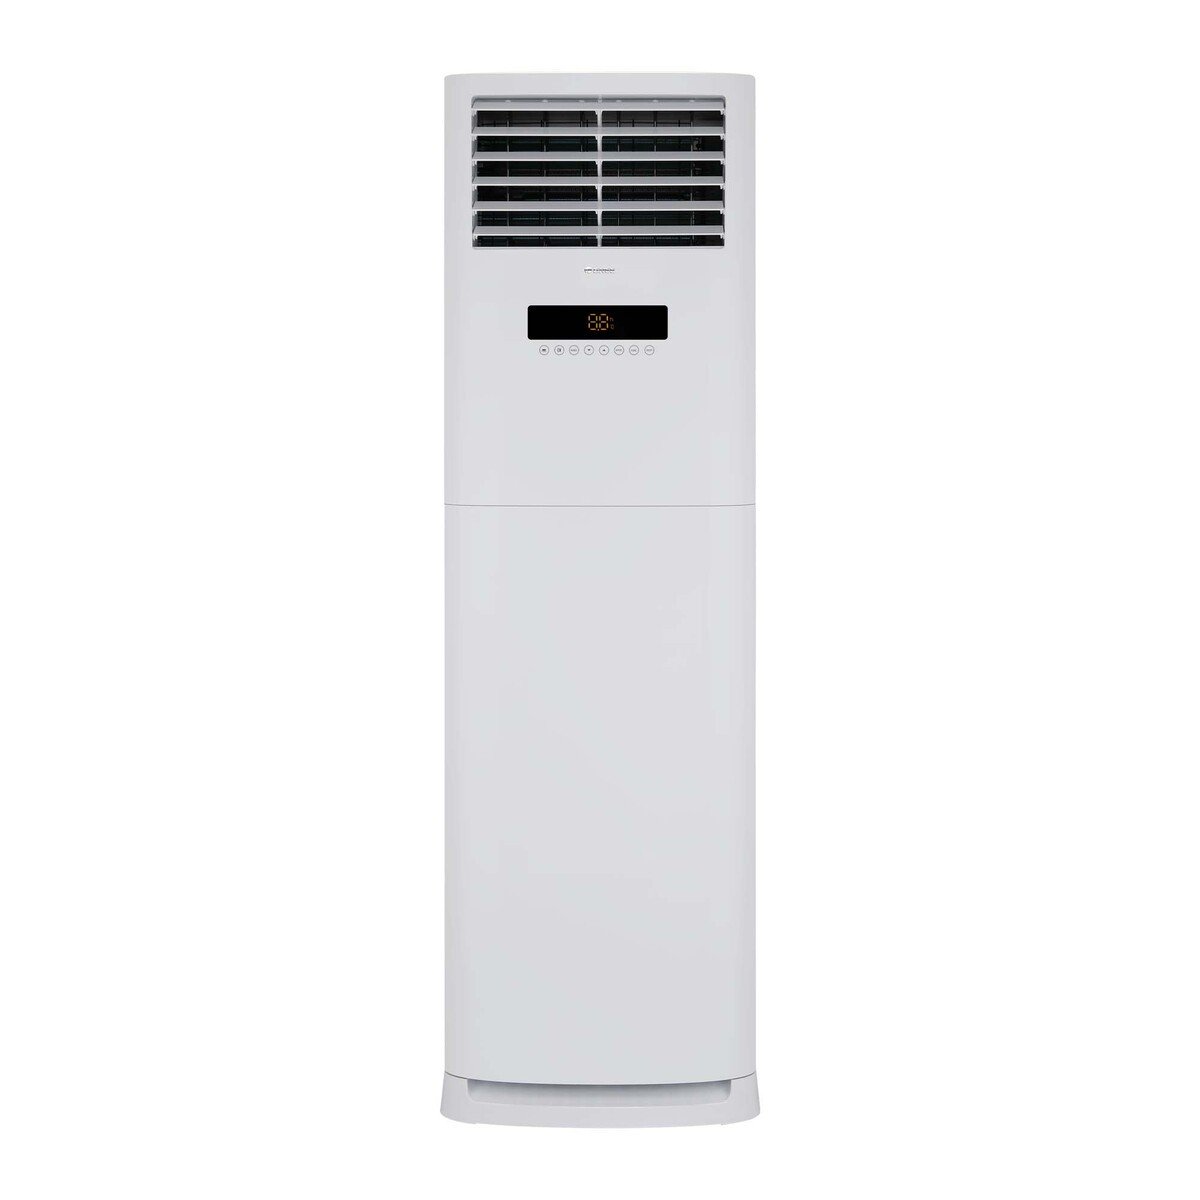 Gree Floor Stand Air Conditioner (Rotary Compressor) T4 MATIC-T36C3 3Ton, White